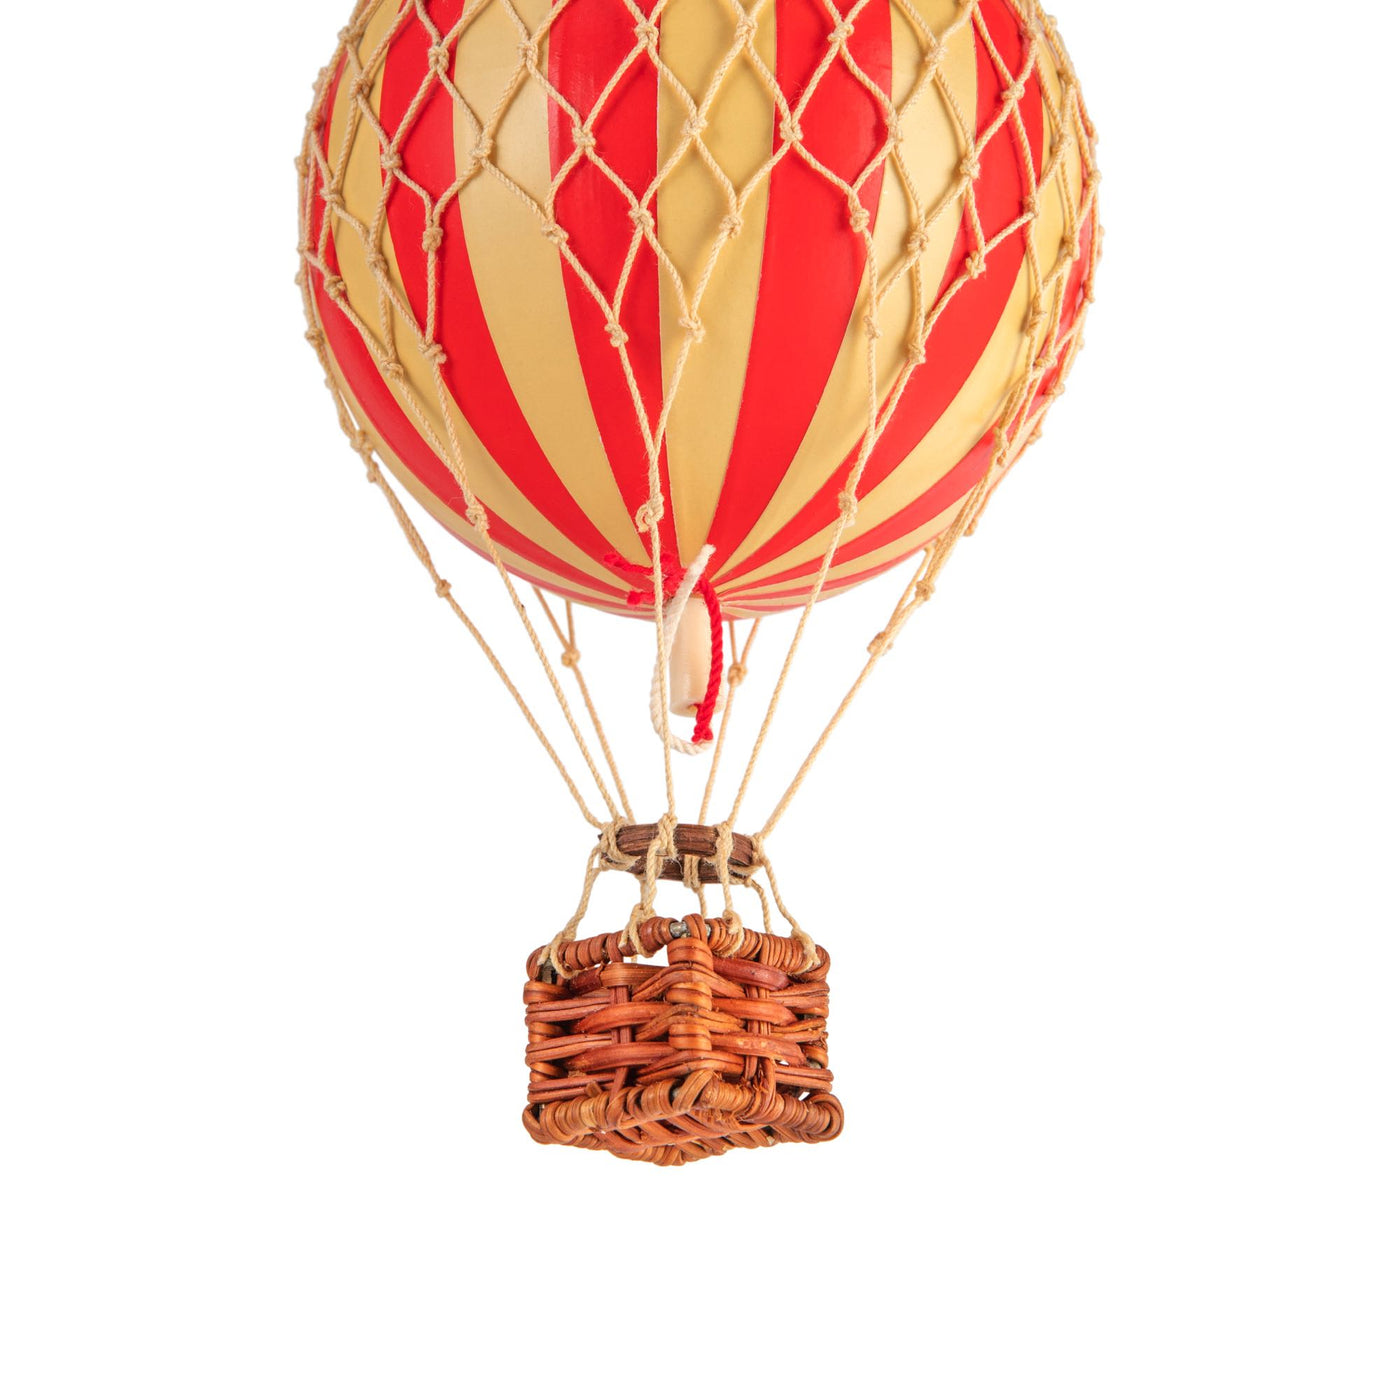 Luftballon True Red, 8,5 cm. Floating The Skies, Authentic Models